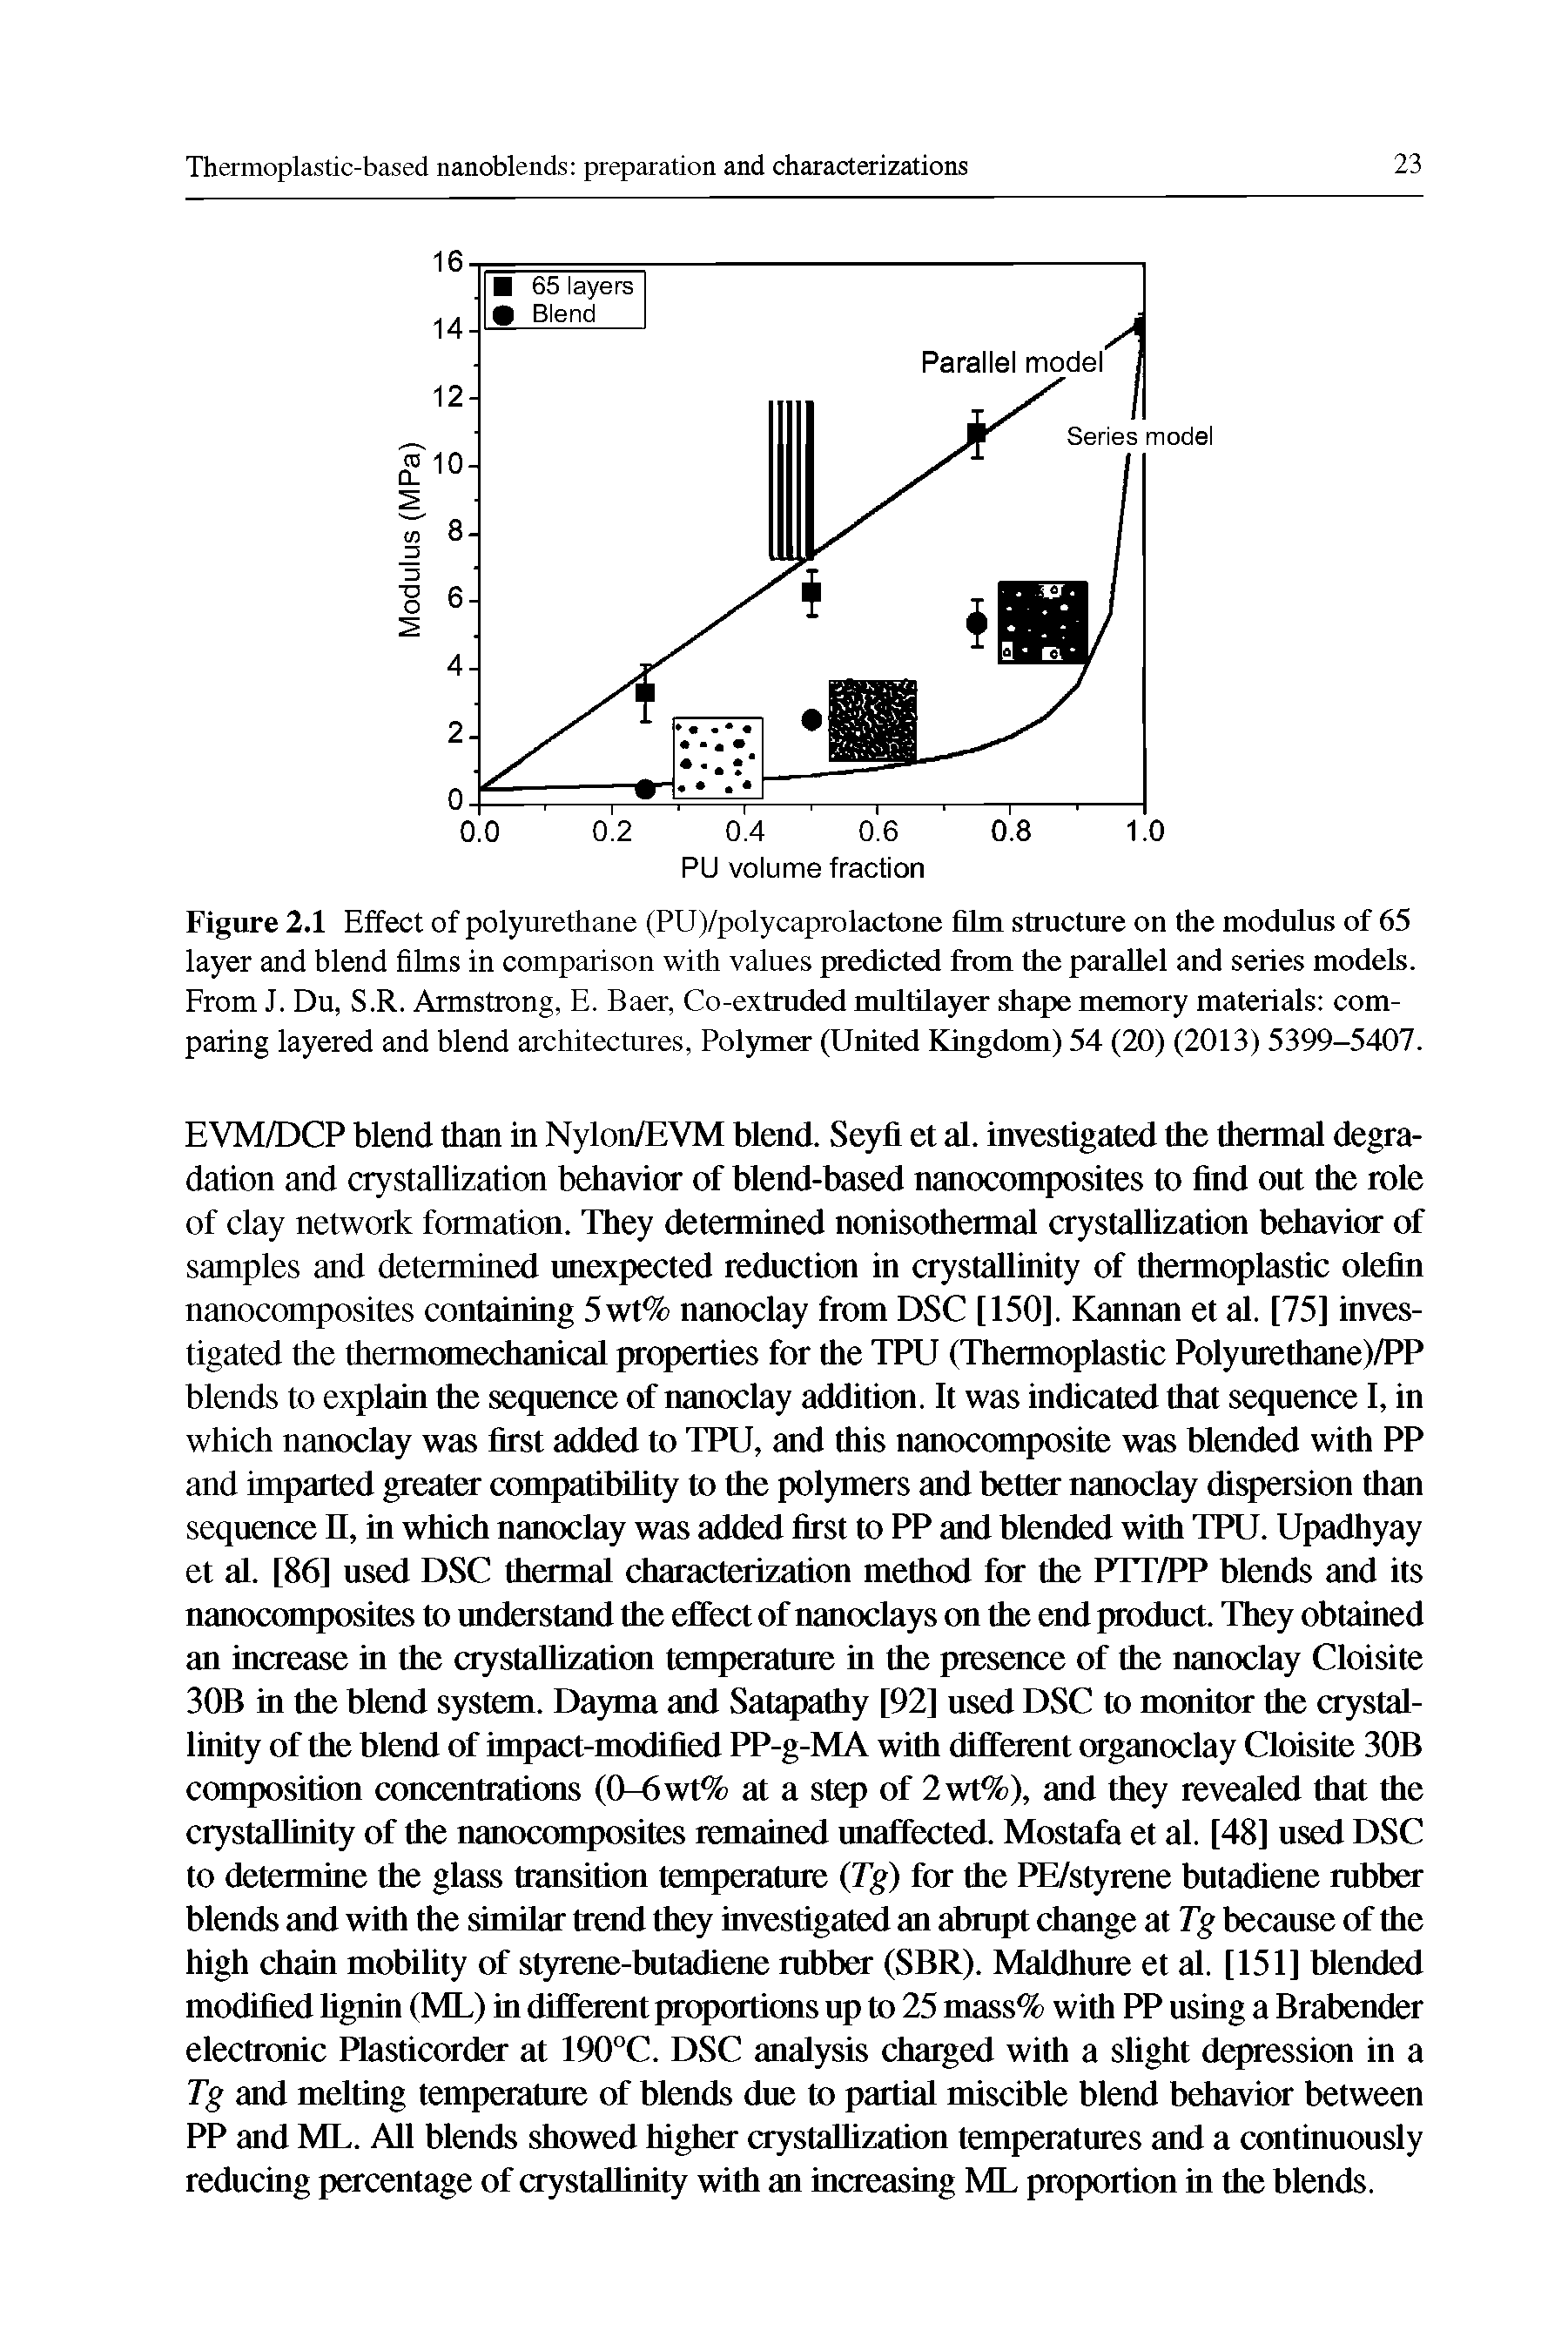 Figure 2.1 Effect of polyurethane (PU)/polycaprolactone flbn structure on the modulus of 65 layer and blend films in comparison with values predicted from the parallel and series models. From J. Du, S.R. Armstrong, E. Baer, Co-extruded multilayer shape memory materials comparing layered and blend architectures. Polymer (United Kingdom) 54 (20) (2013) 5399-5407.